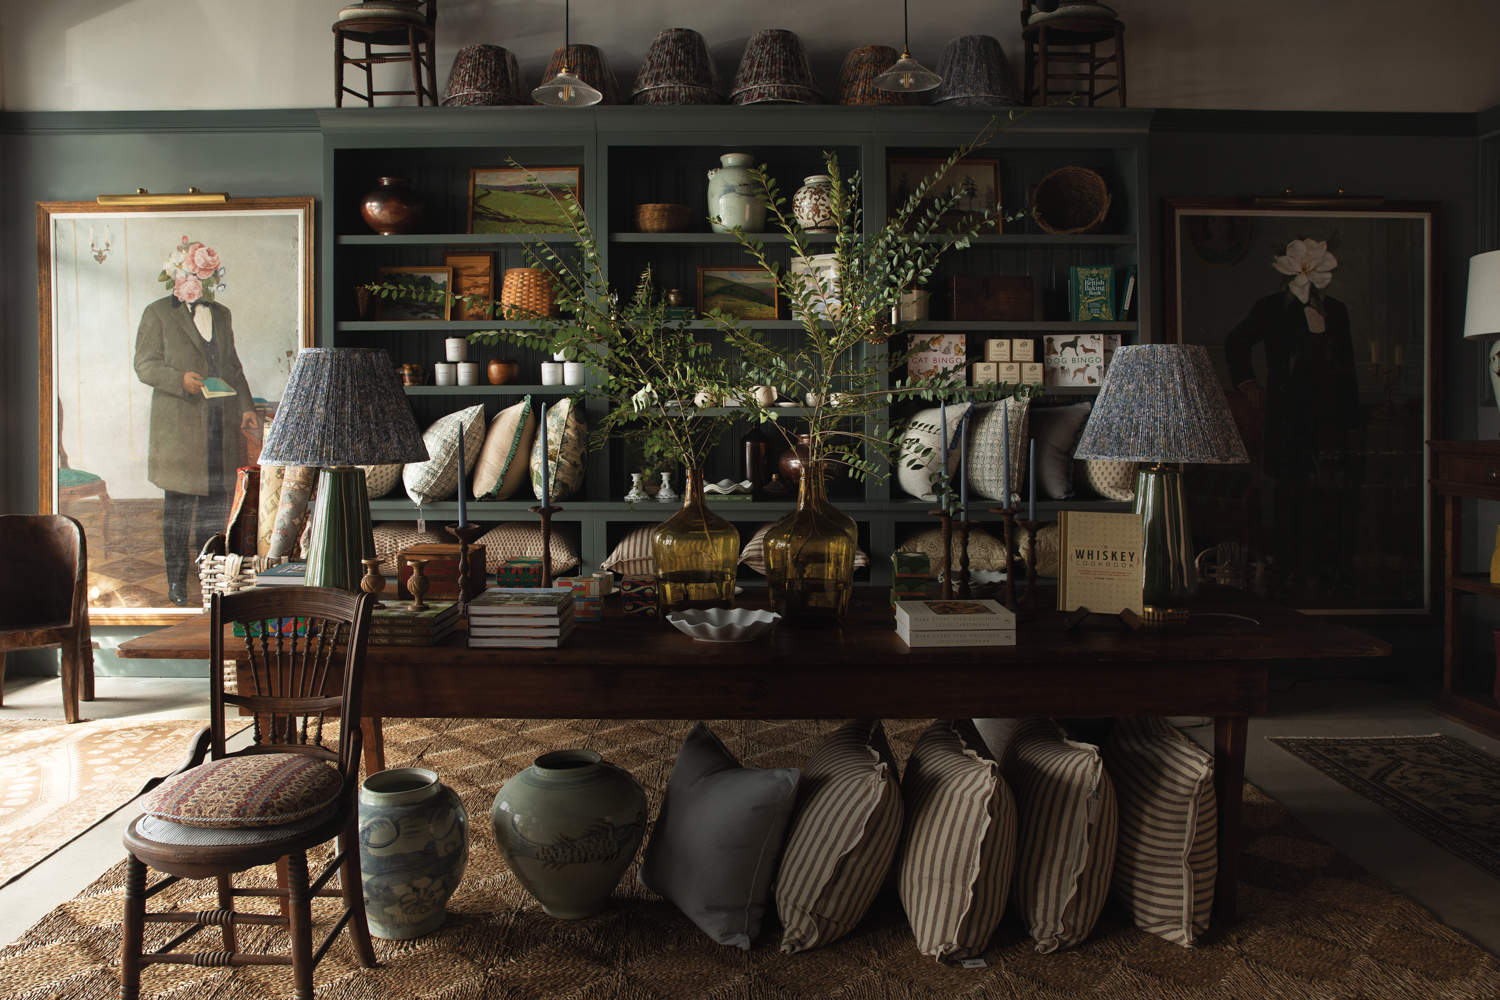 heirloom artifacts in nashville with chairs, lamps, pillows, and vases